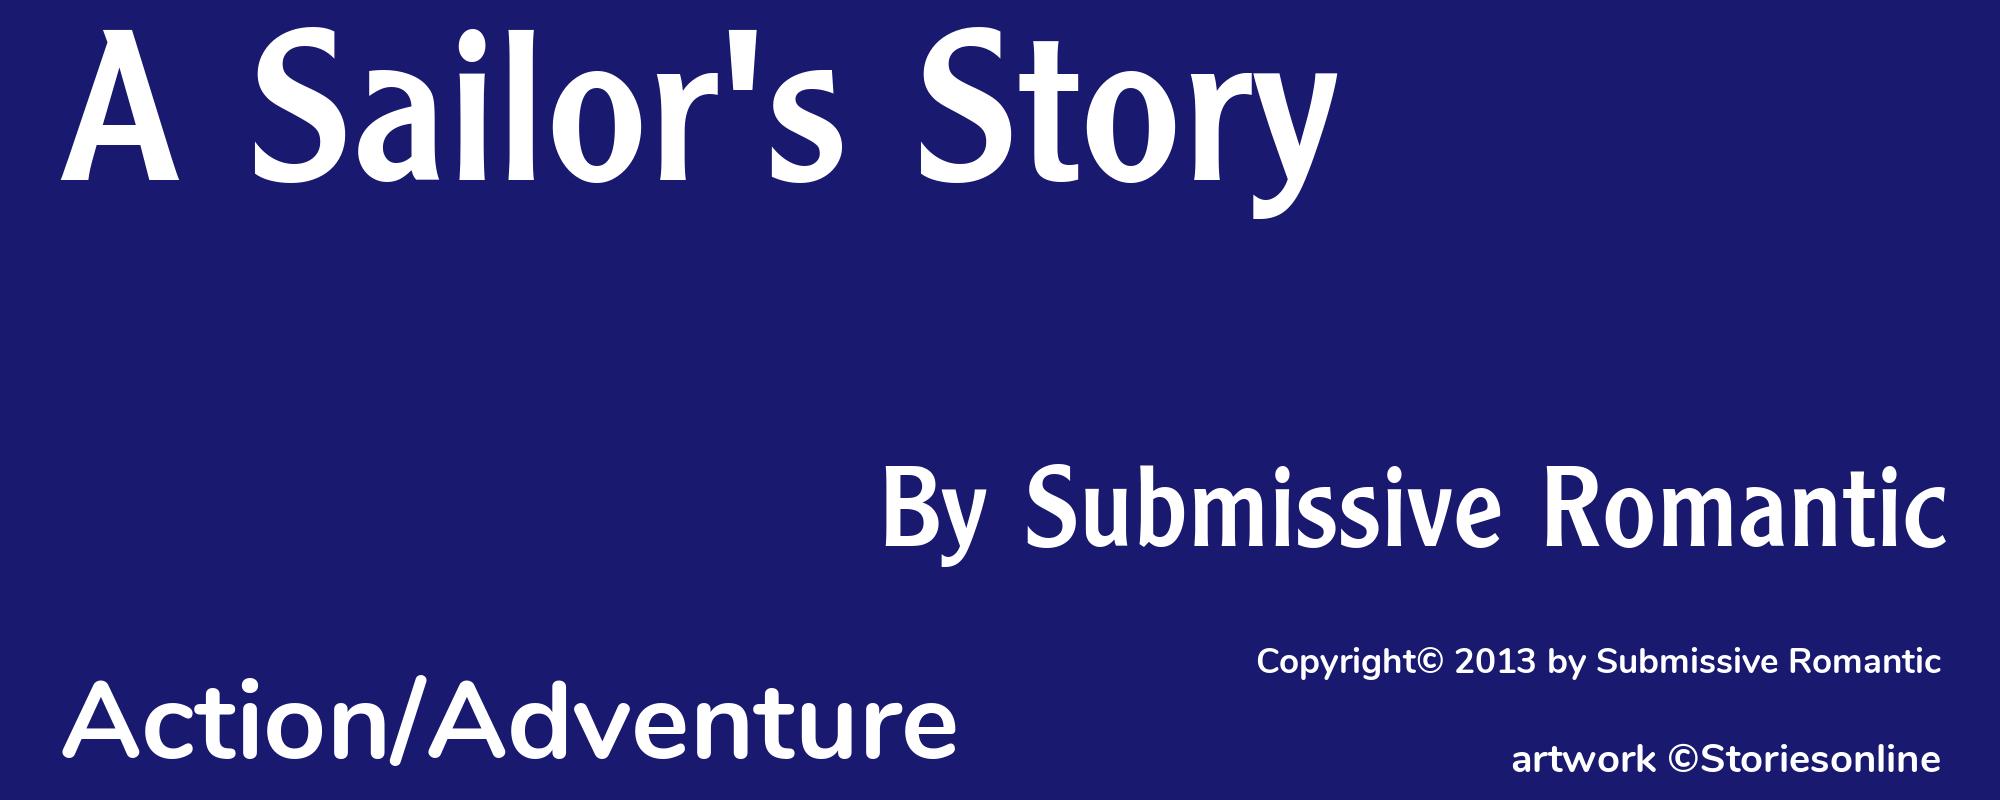 A Sailor's Story - Cover